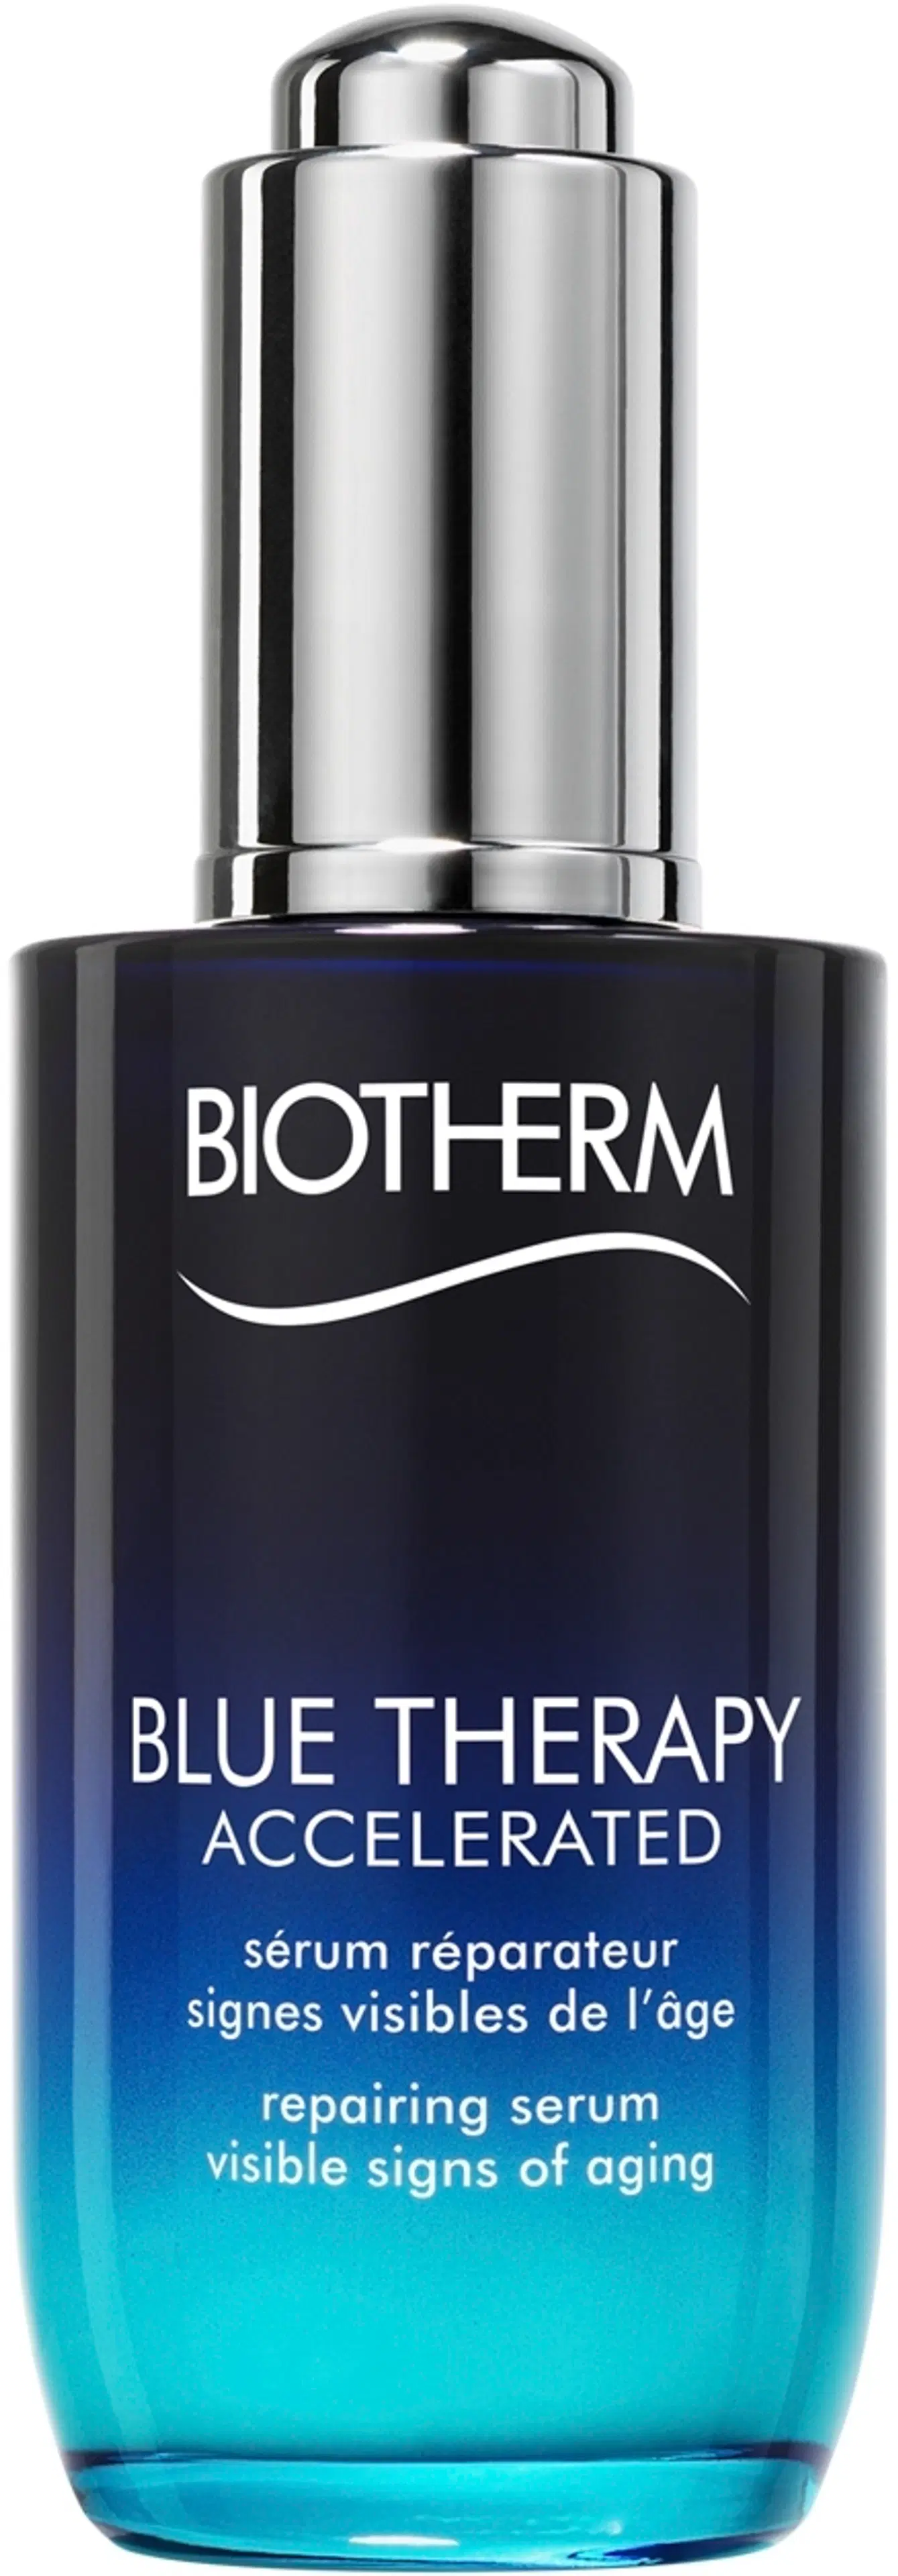 Biotherm Blue Therapy Accelerated seerumi 30 ml